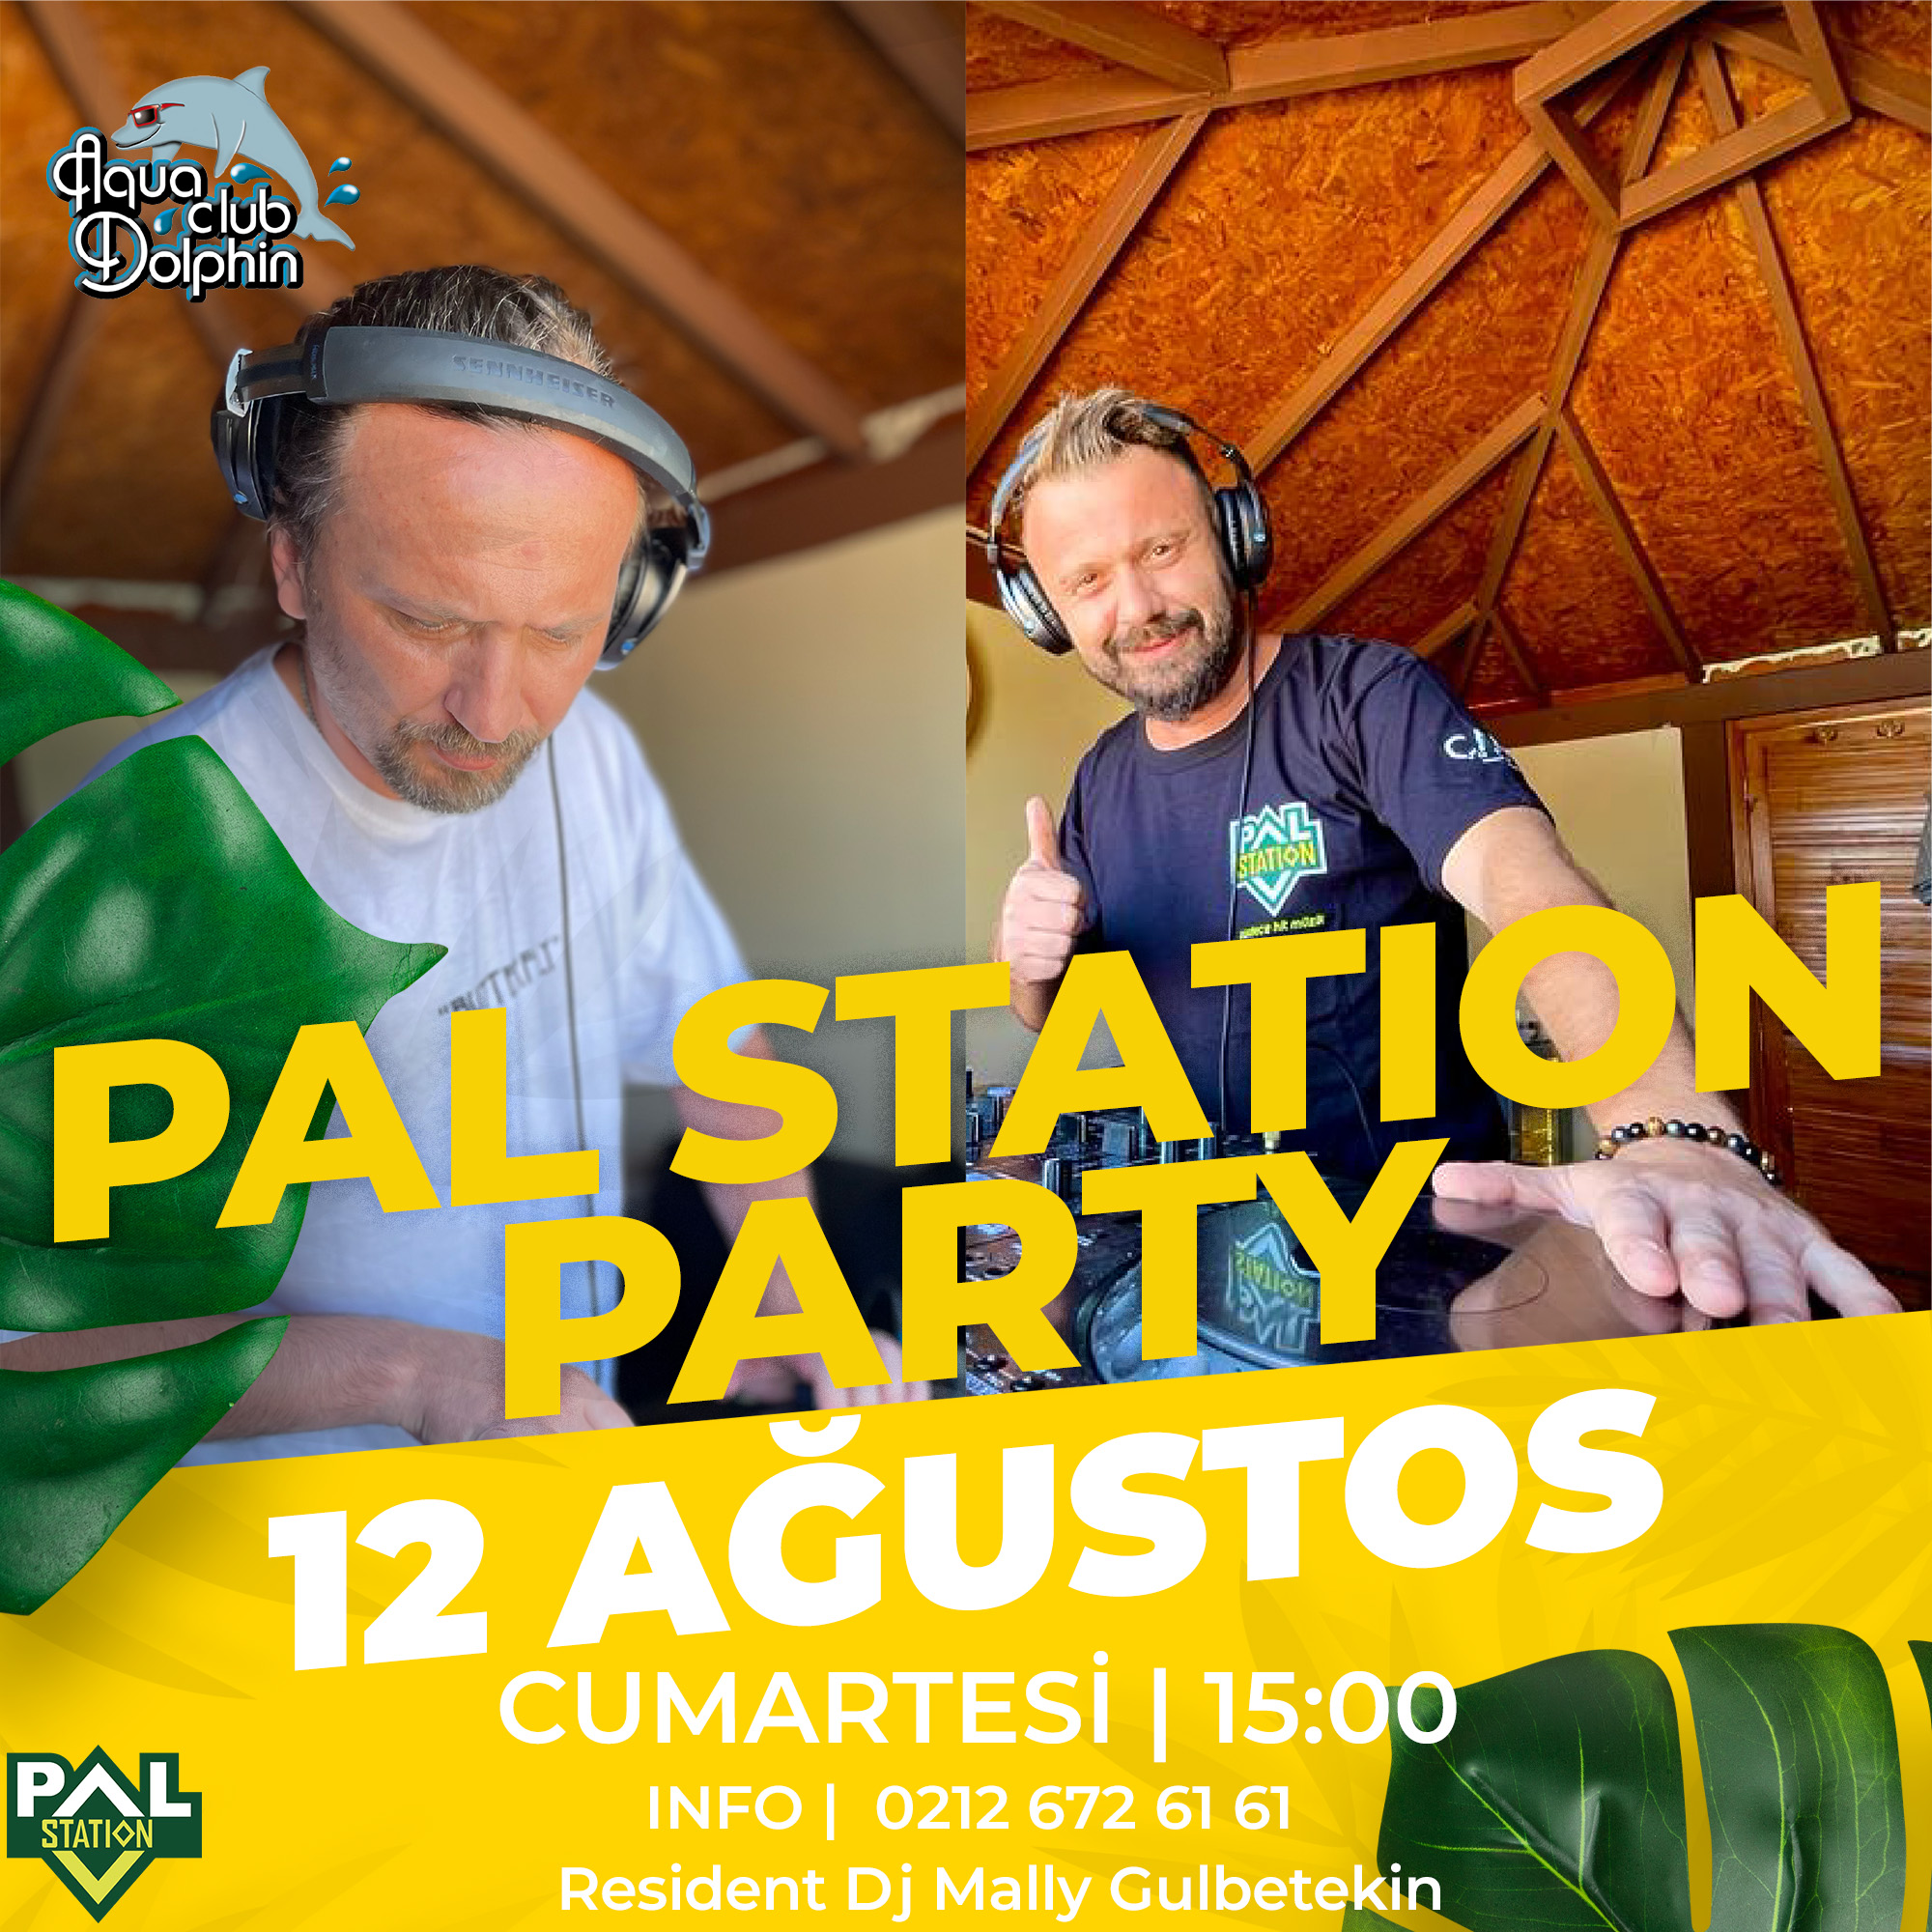 PAL STATION PARTY